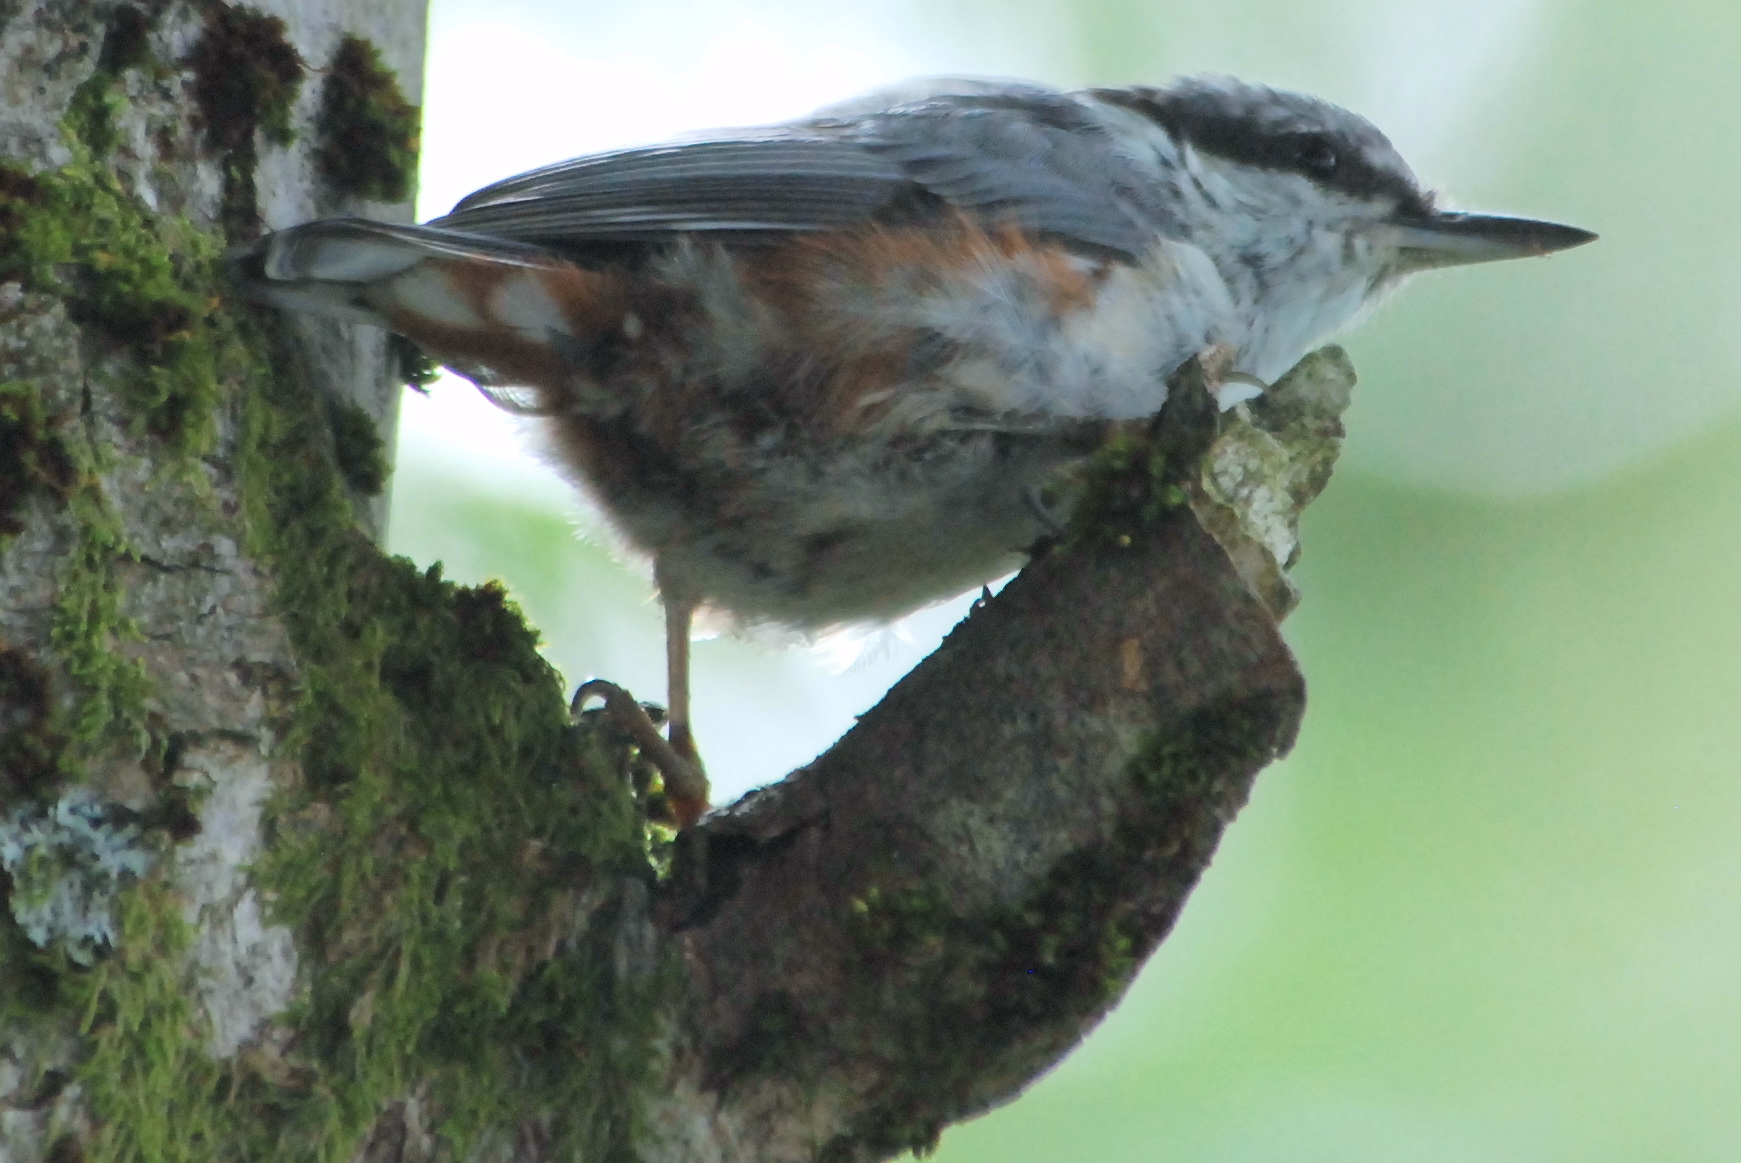 Click picture to see more Eurasian Nuthatches.